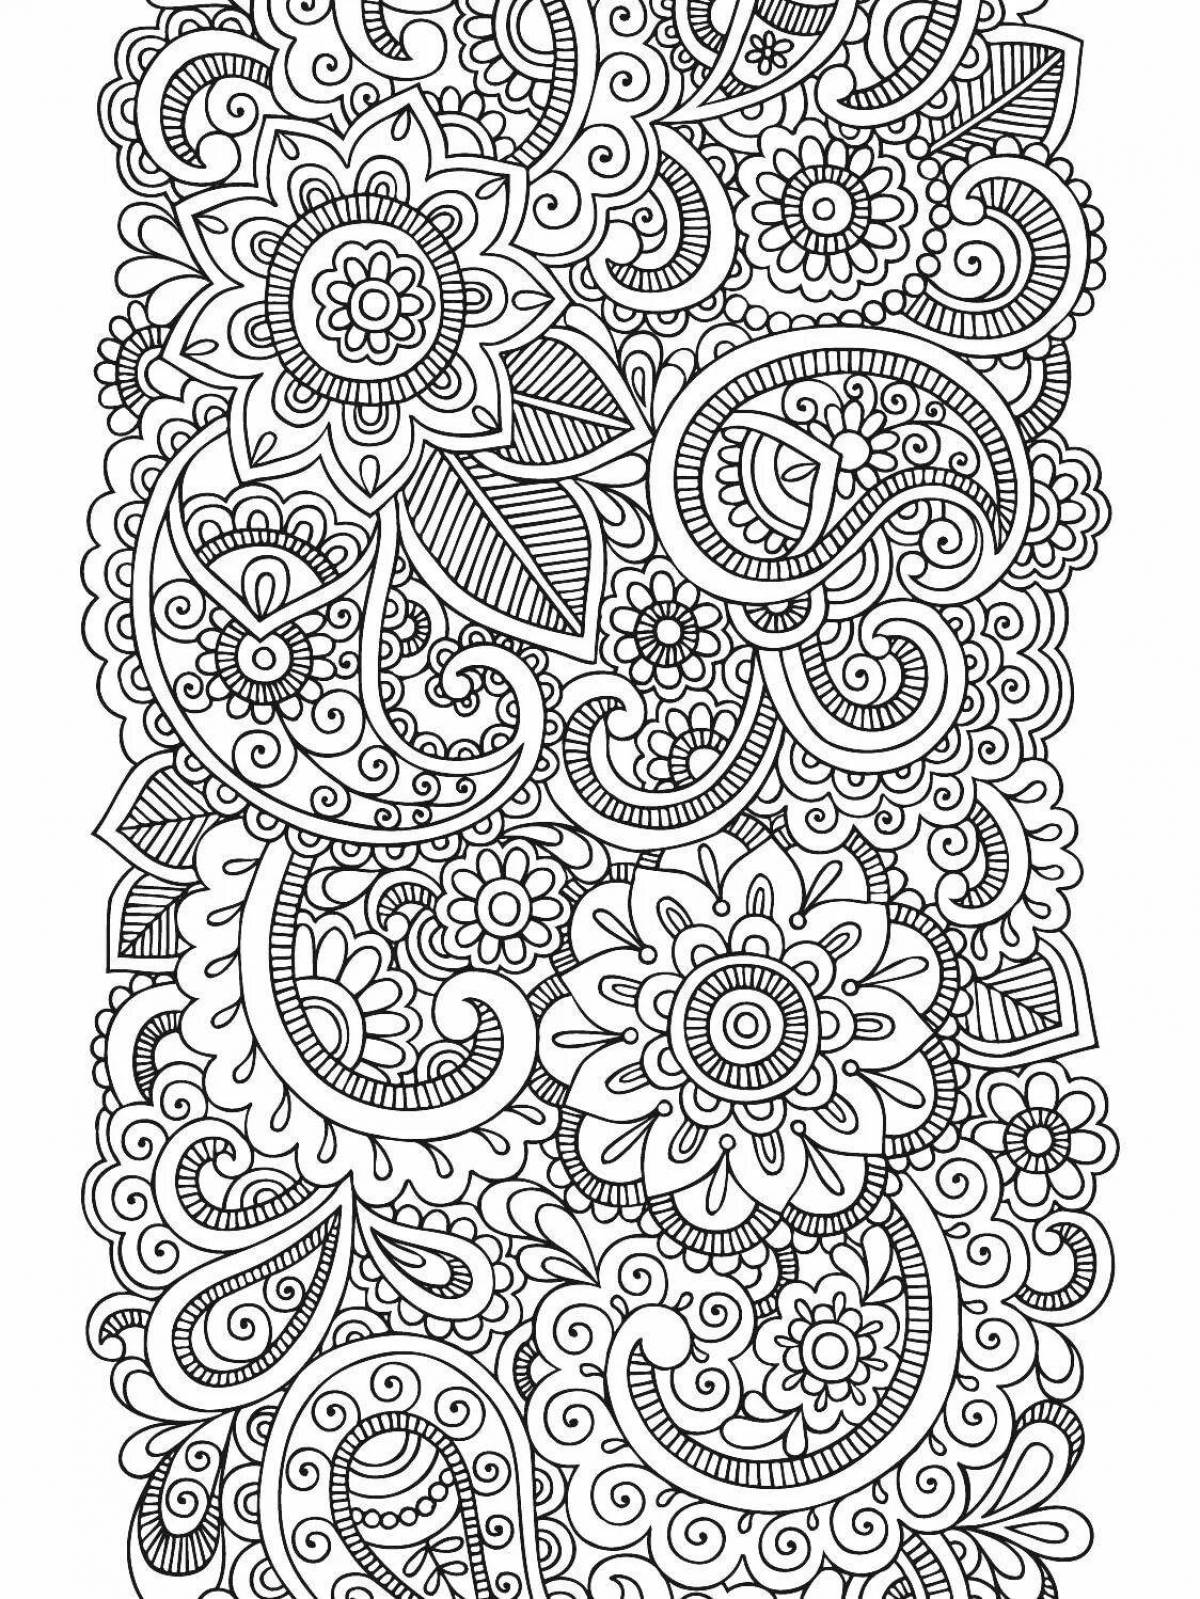 Coloring page with intricate designs